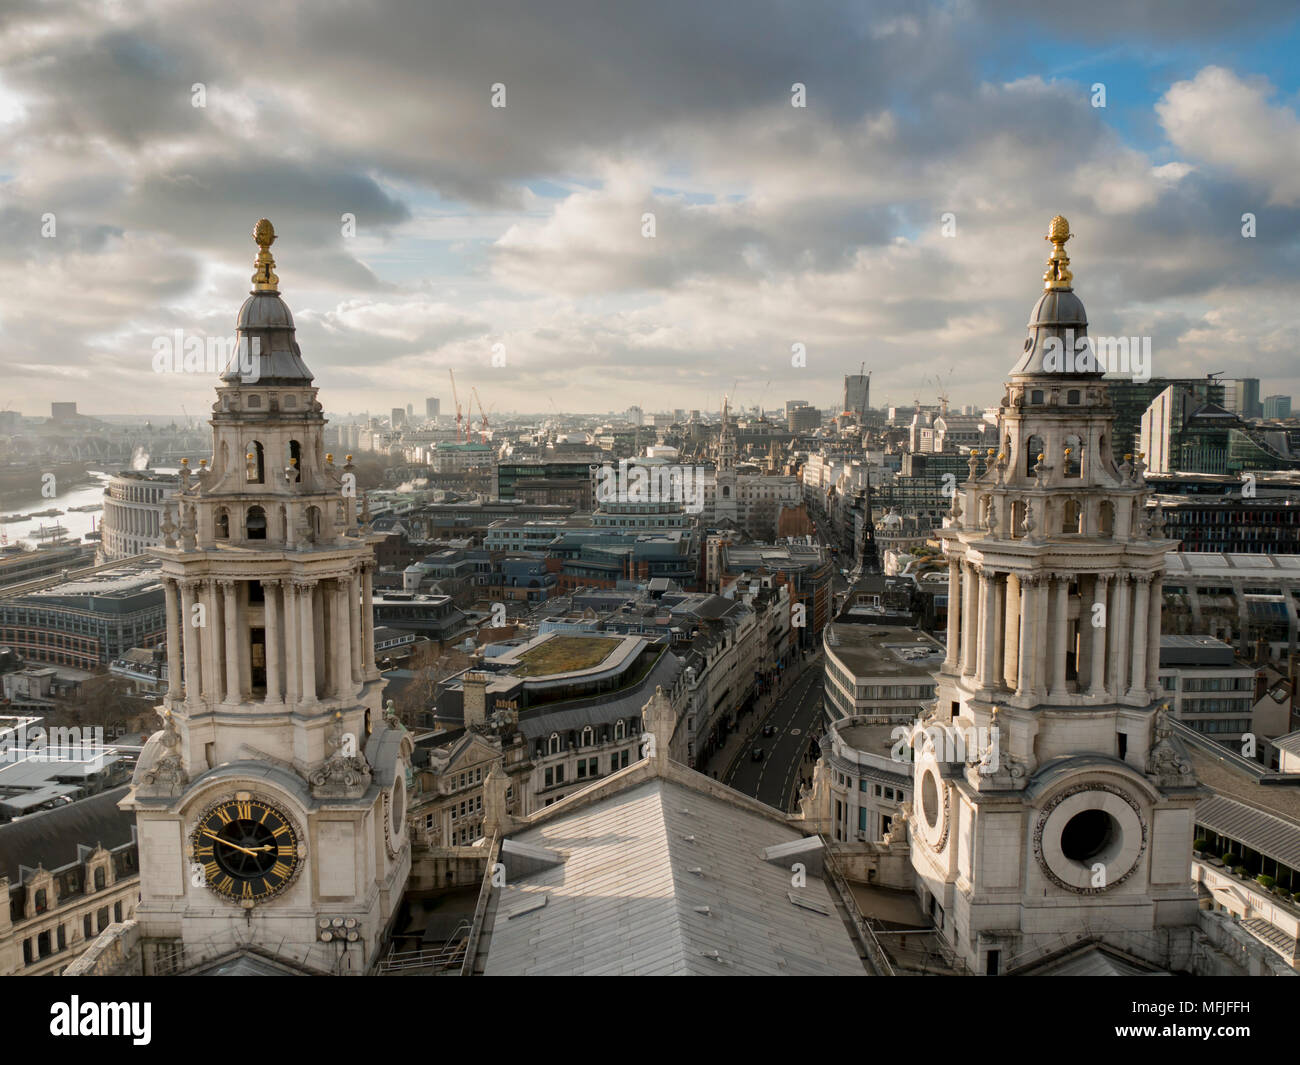 Saint Pauls Cathedral spires double frame cityscape, Londres, Angleterre, Royaume-Uni, Europe Banque D'Images